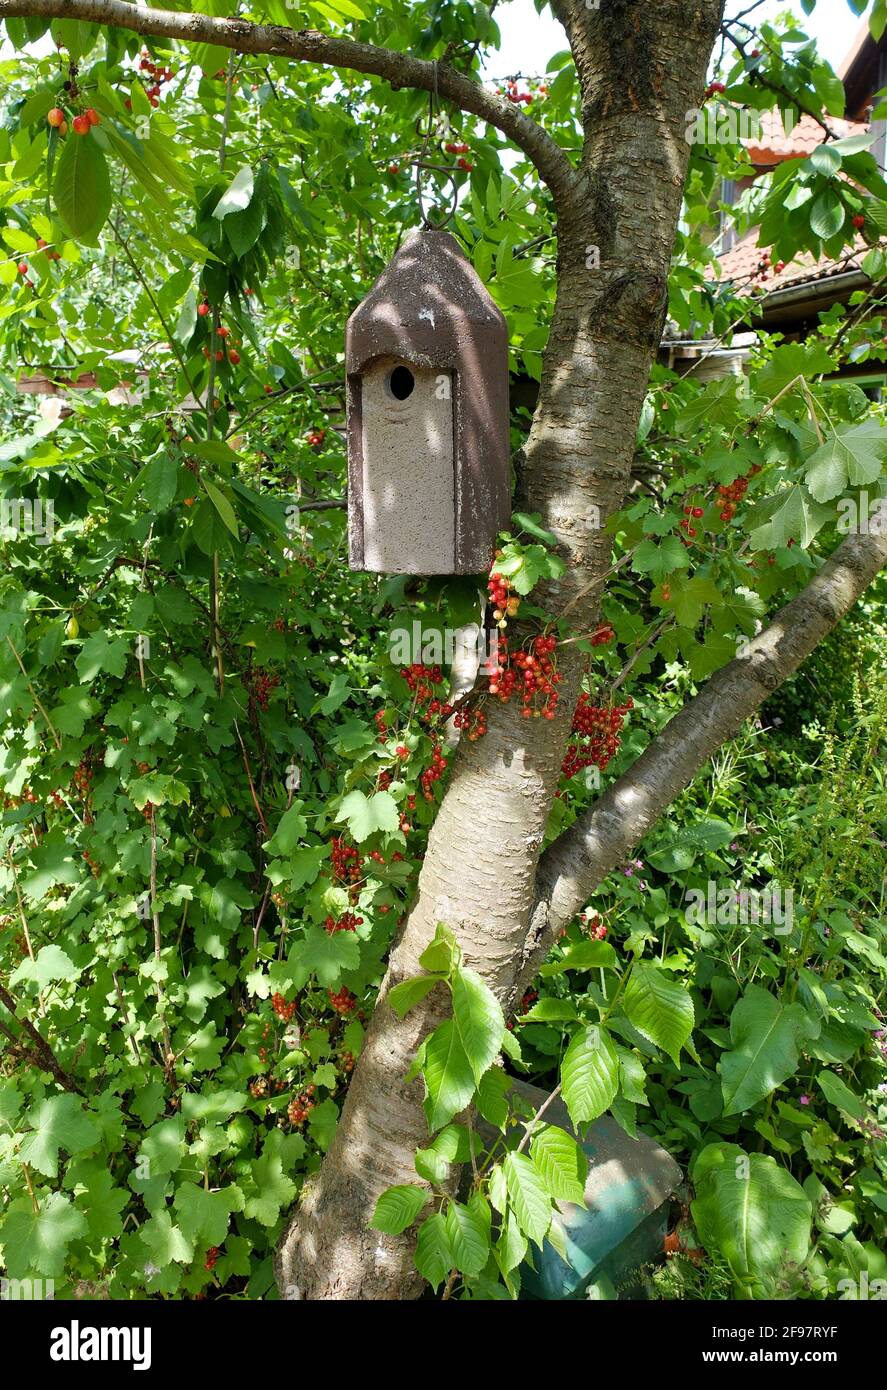 Concrete nesting box on the cherry tree, below: The red currant (Ribes rubrum) Stock Photo